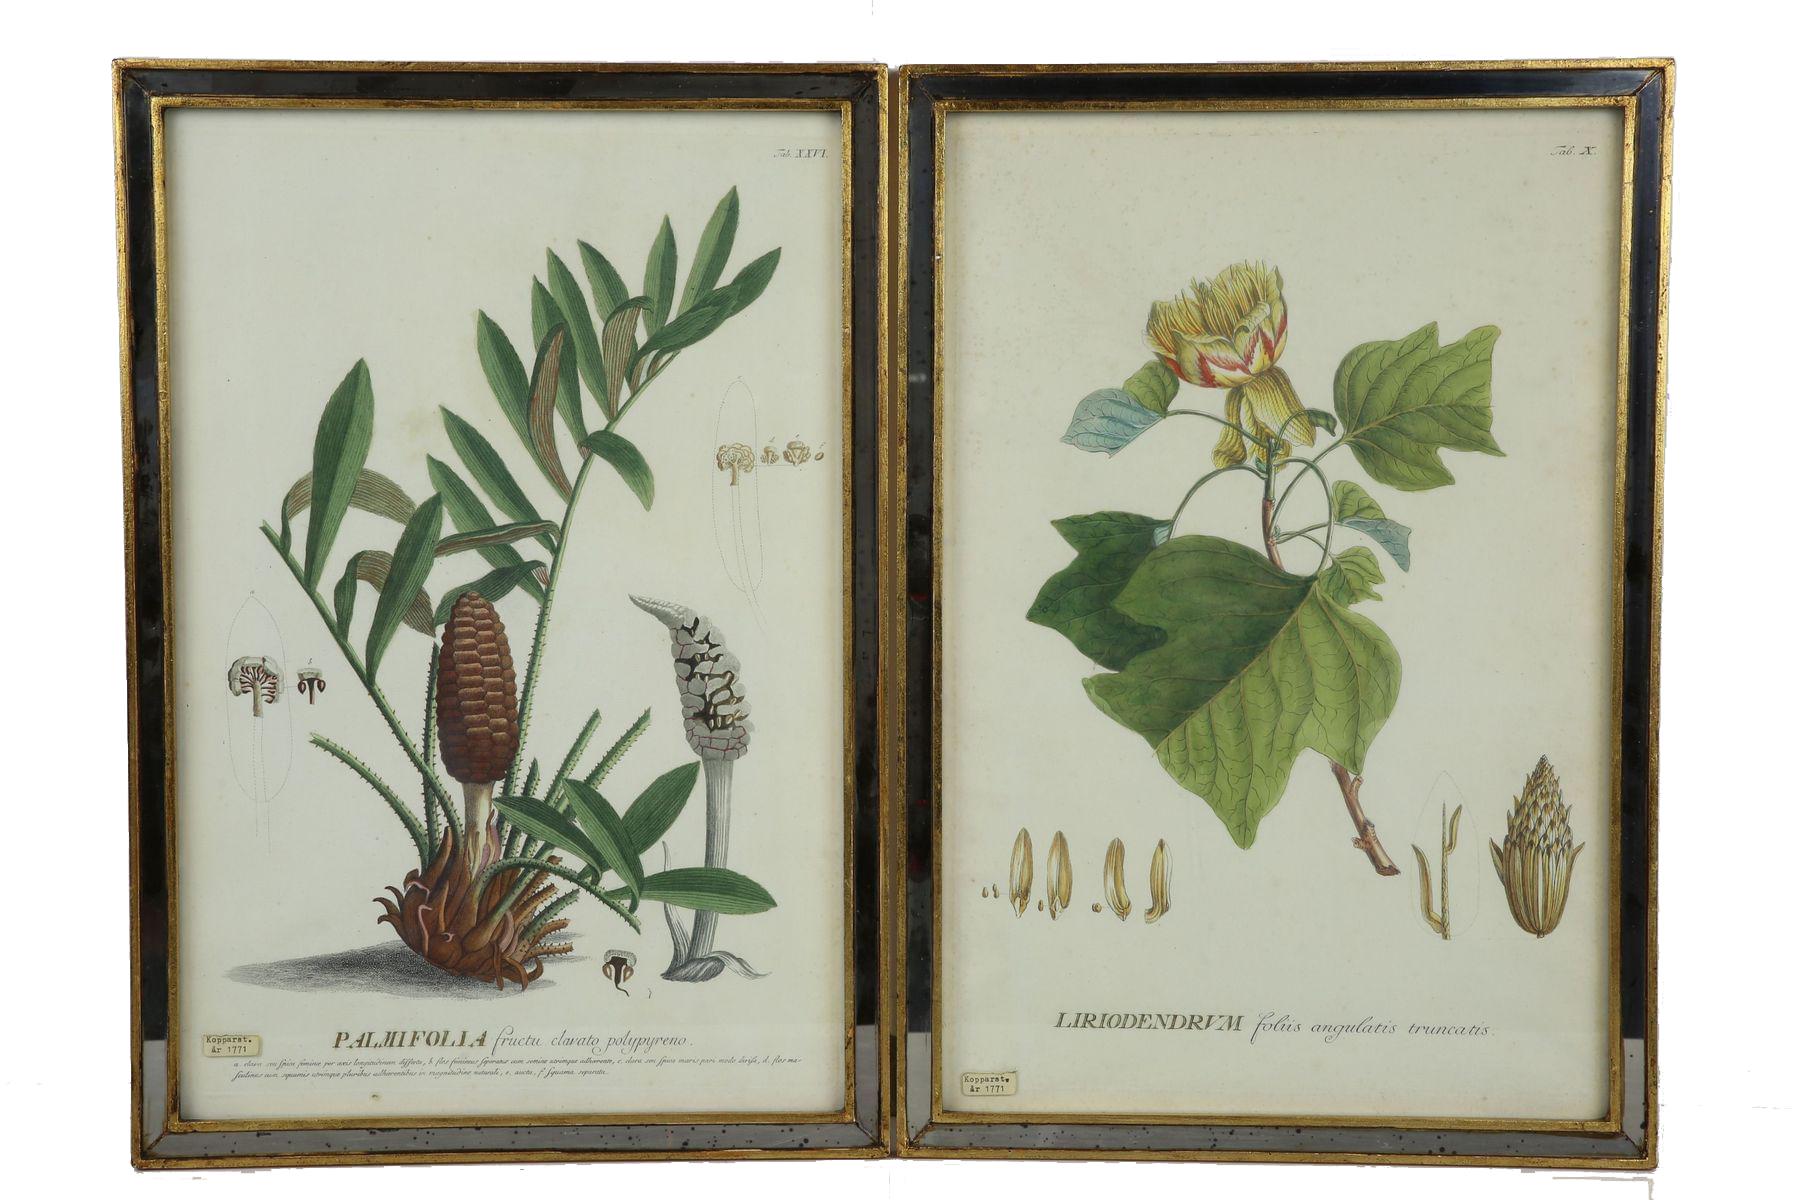 Adorning the walls, two gracefully framed botanical engravings from 1771 capture nature's elegance in exquisite detail. Delicate strokes of artistry breathe life into intricate foliage, showcasing the intricate beauty of palm leaves and lush fronds.